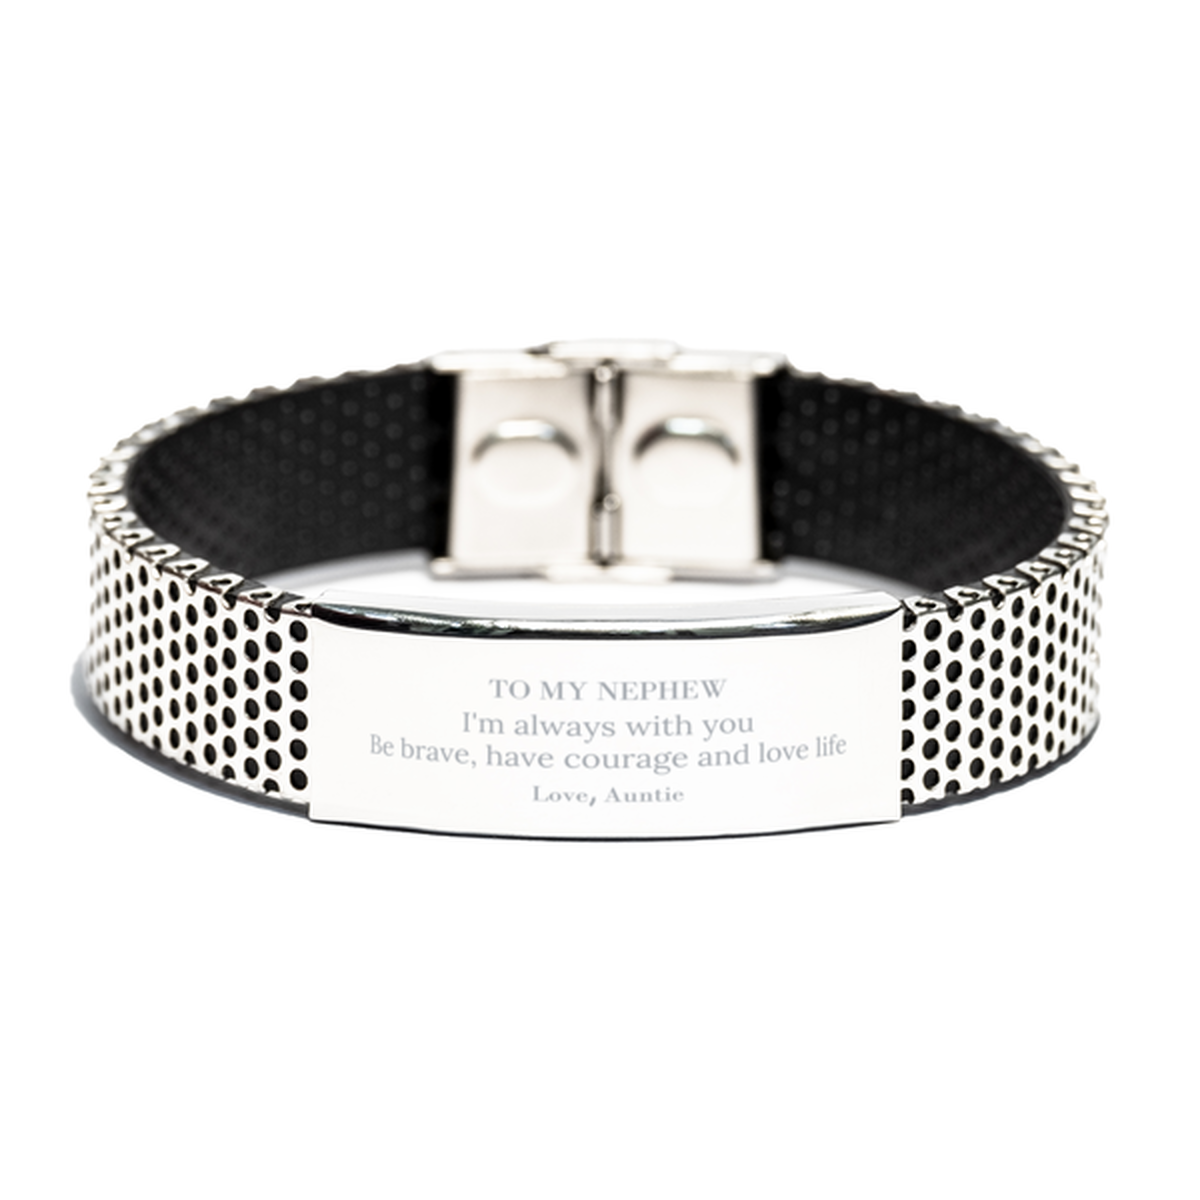 To My Nephew Gifts from Auntie, Unique Stainless Steel Bracelet Inspirational Christmas Birthday Graduation Gifts for Nephew I'm always with you. Be brave, have courage and love life. Love, Auntie